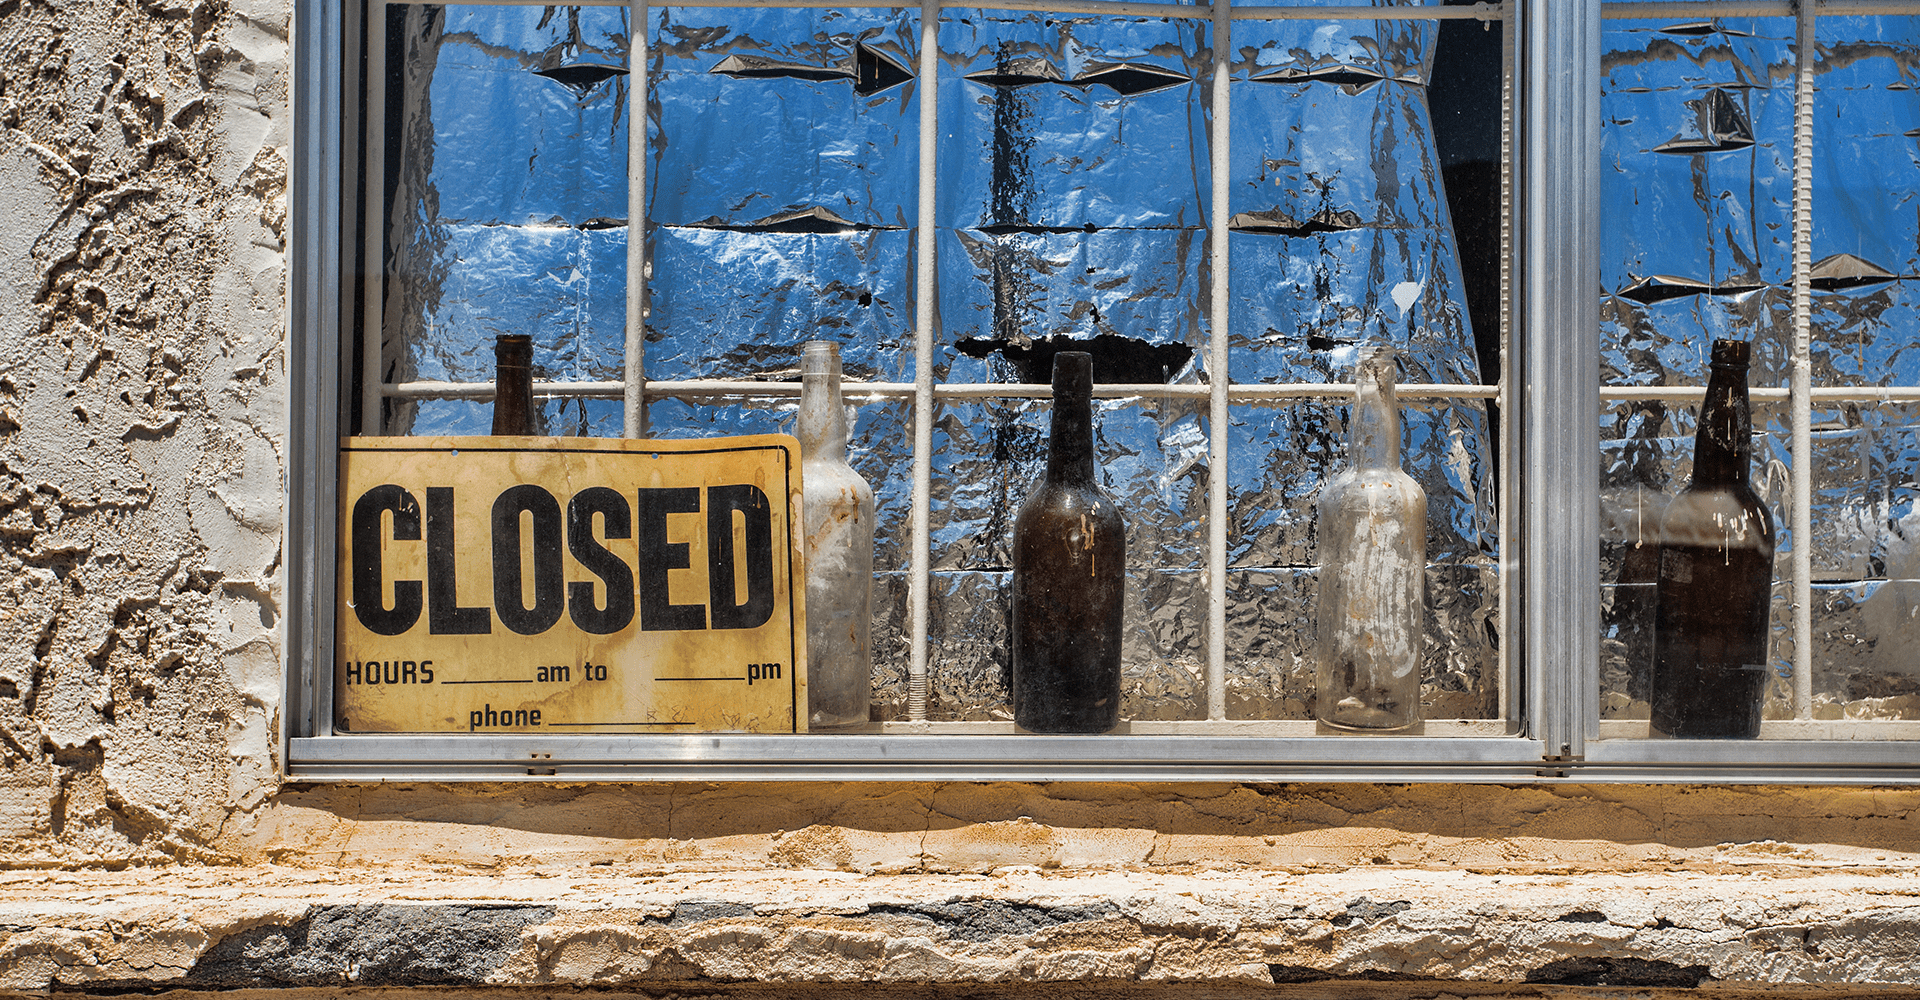 Closed sign on an abandoned restaurant